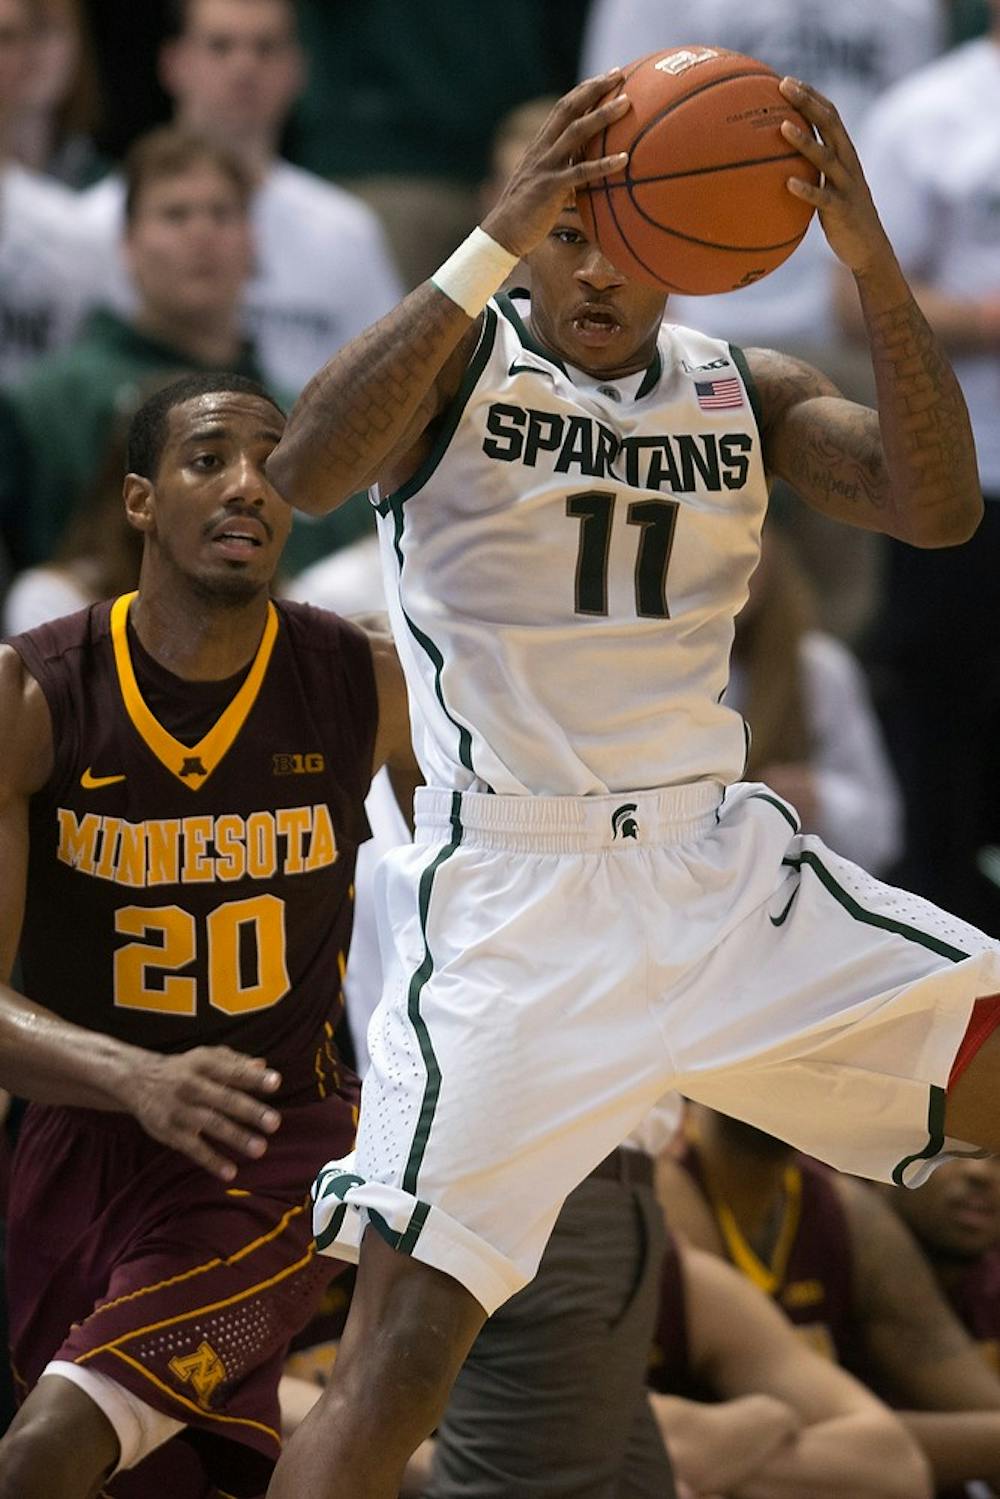 	<p>Senior guard Keith Appling catches a rebound on Jan. 11, 2014, at Breslin Center during the game against Minnesota. The Spartans defeated the Gophers in overtime, 87-75. Julia Nagy/The State News</p>